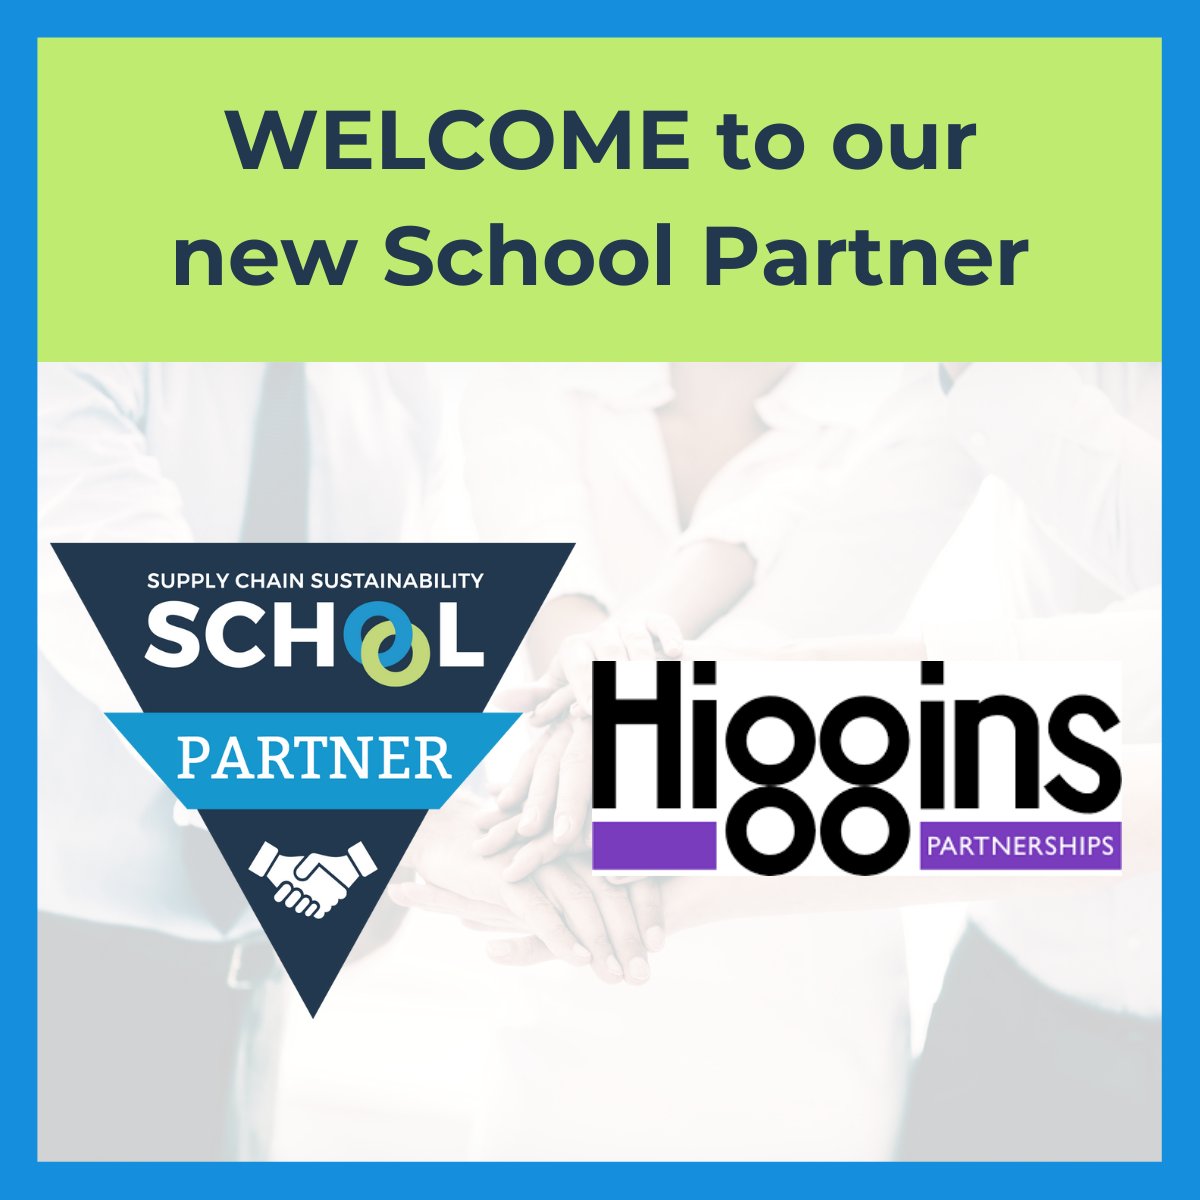 We are now a partner of @SupplyCSSchool joining 200+ other industry leaders in collaboration to drive the sector to a more #sustainable future. As a partner we will lead the development of content & training to upskill our colleagues and supply chain in key sustainability topics